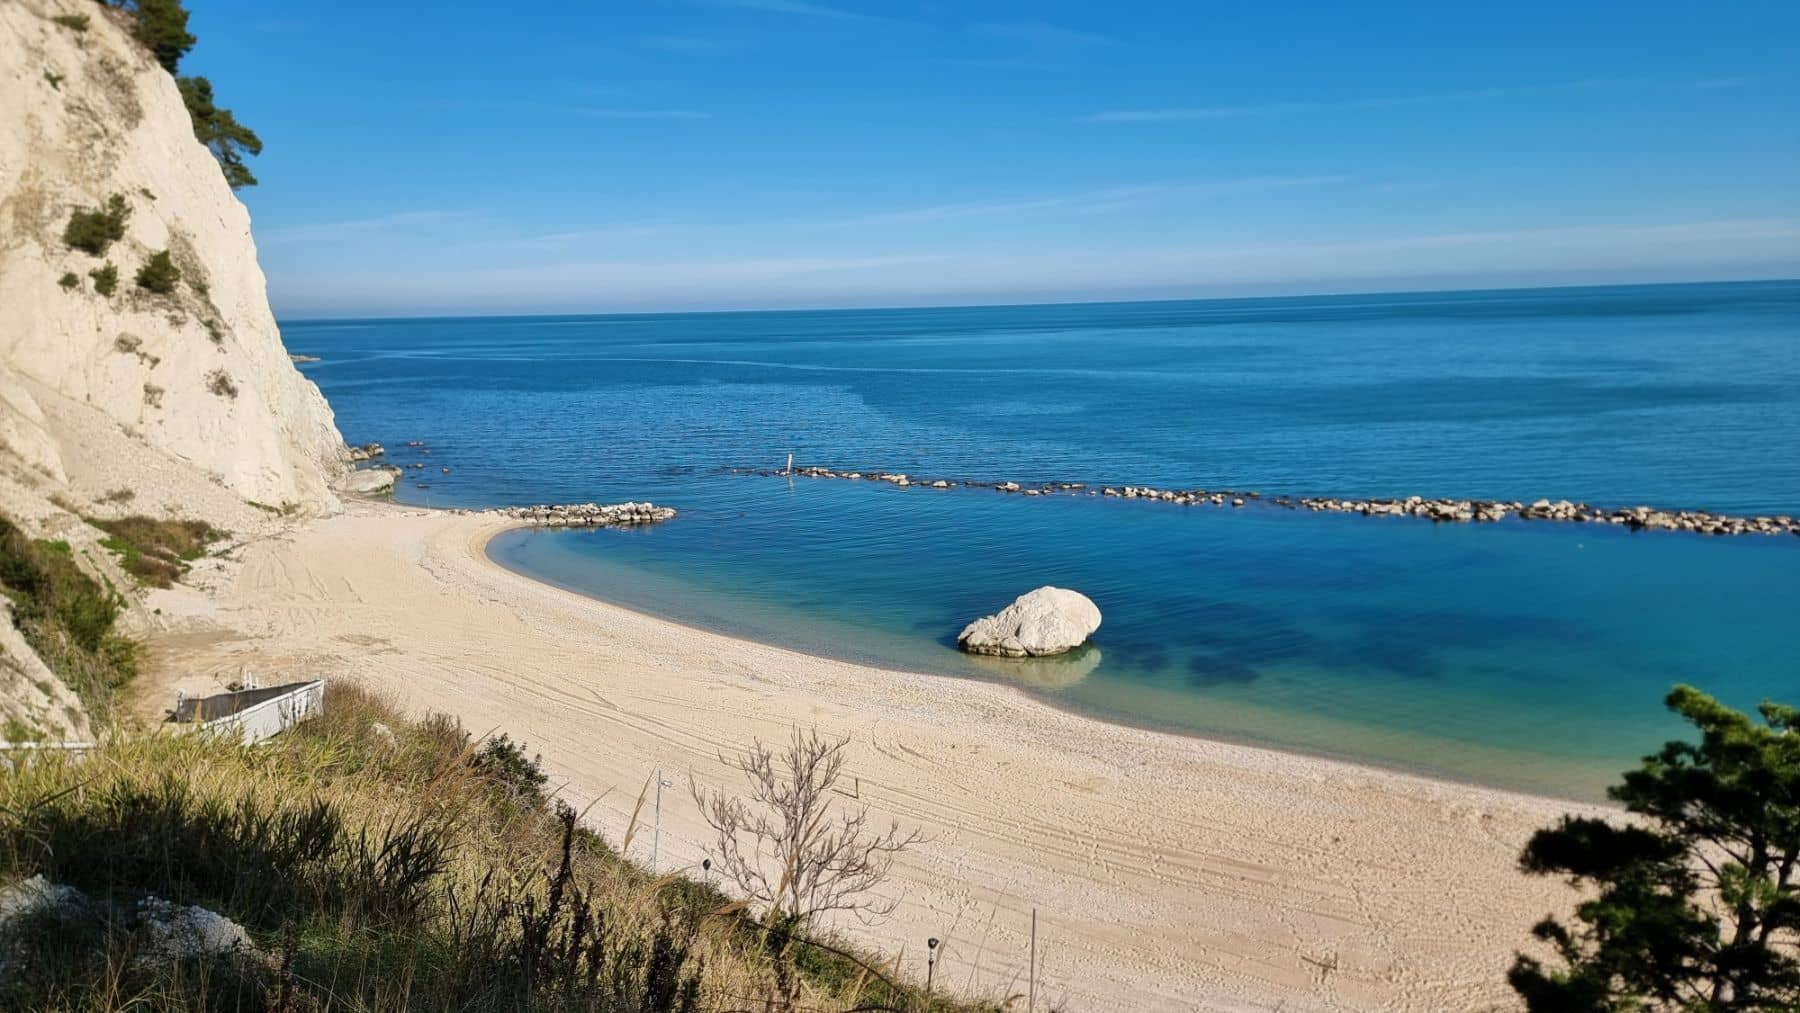 conero riviera - what are the most beautiful beaches and what to visit